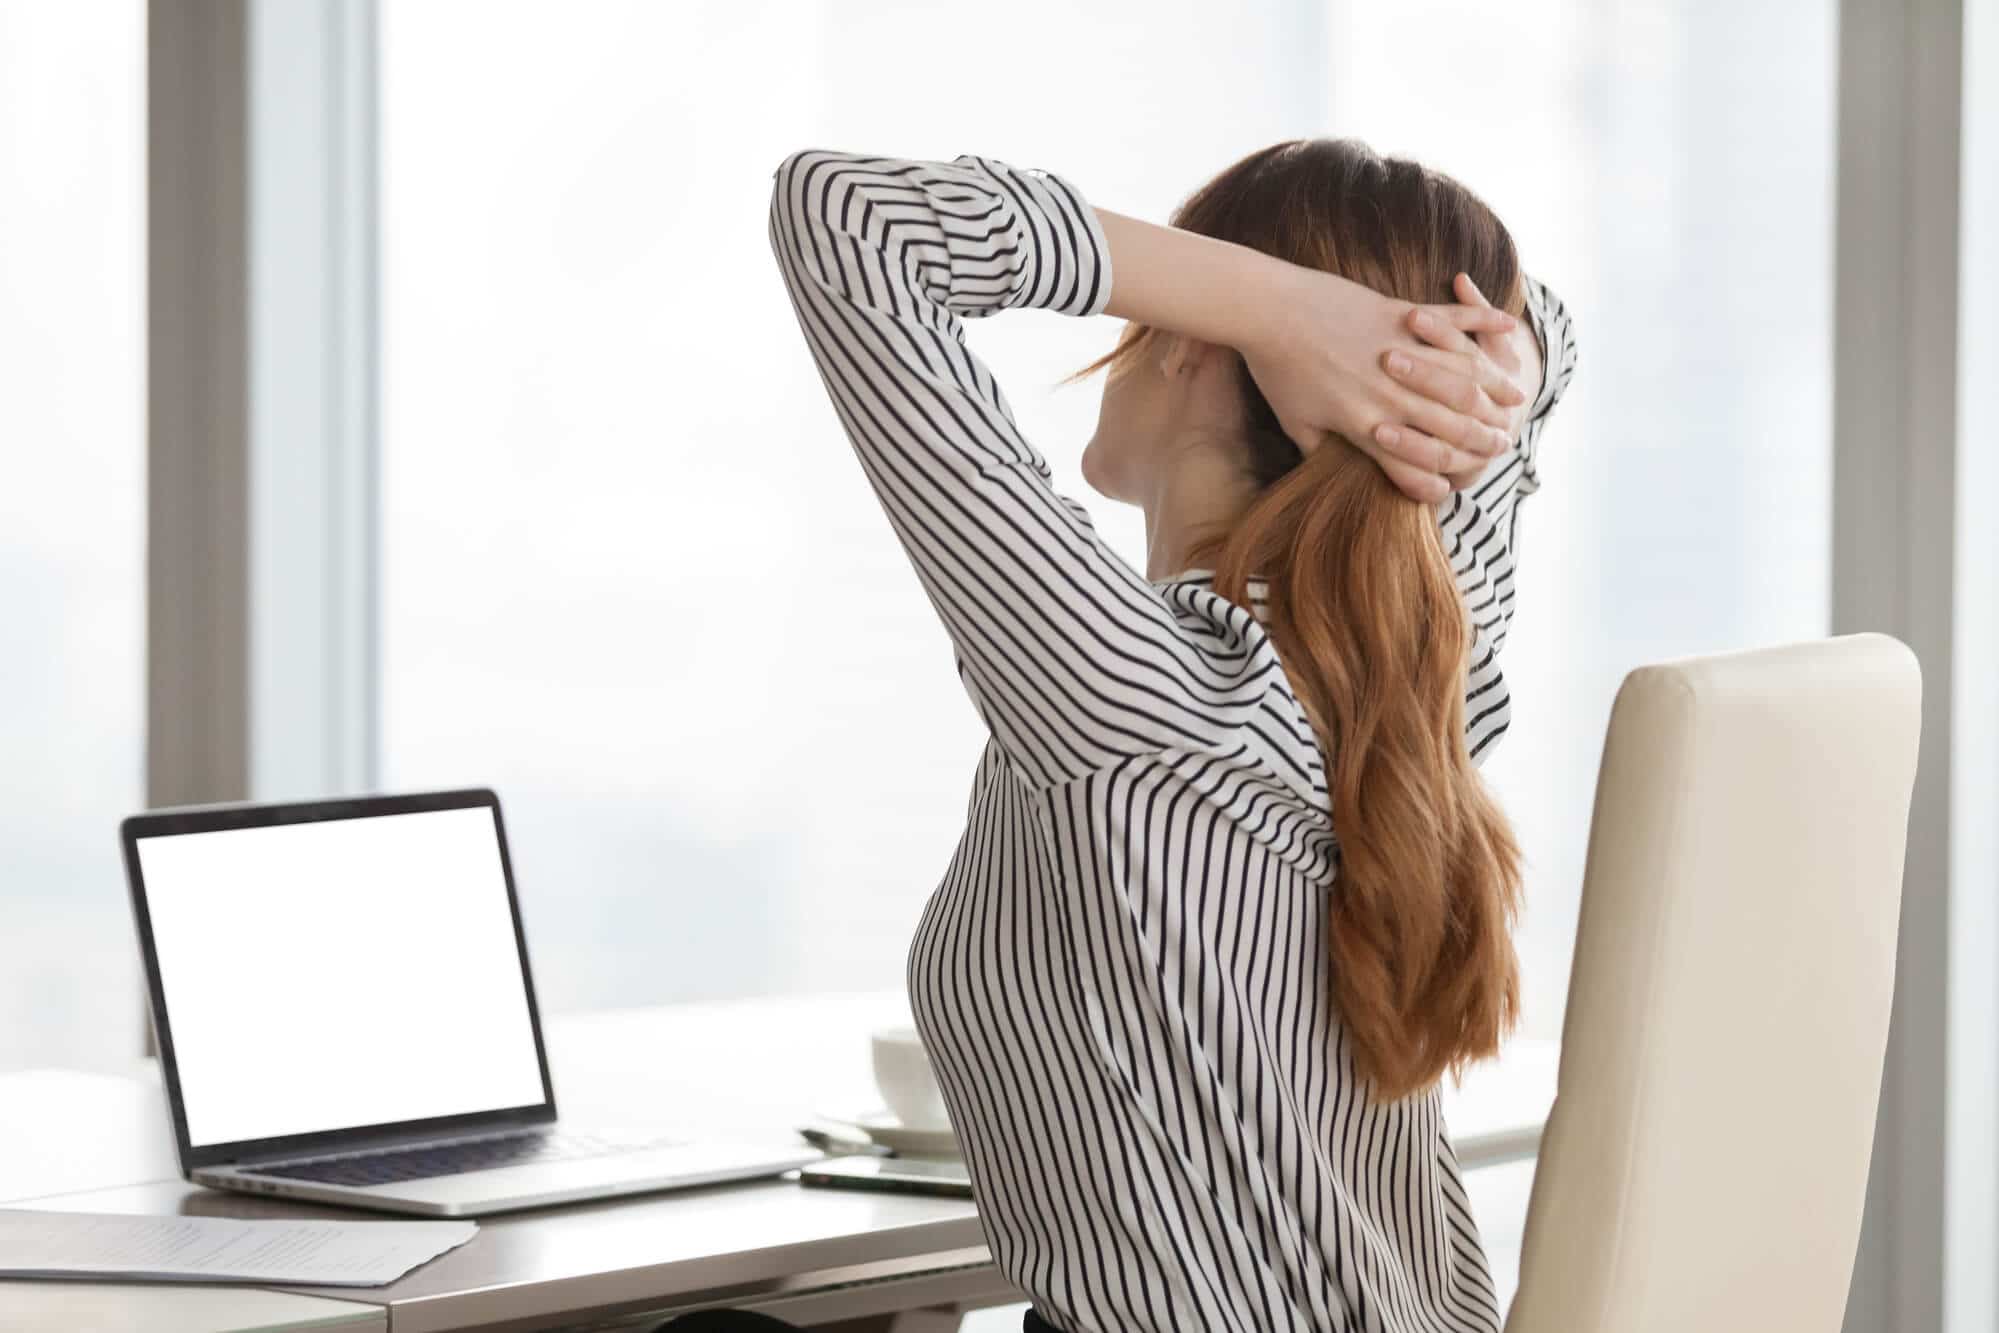 How To Lose Weight While Sitting At The Office